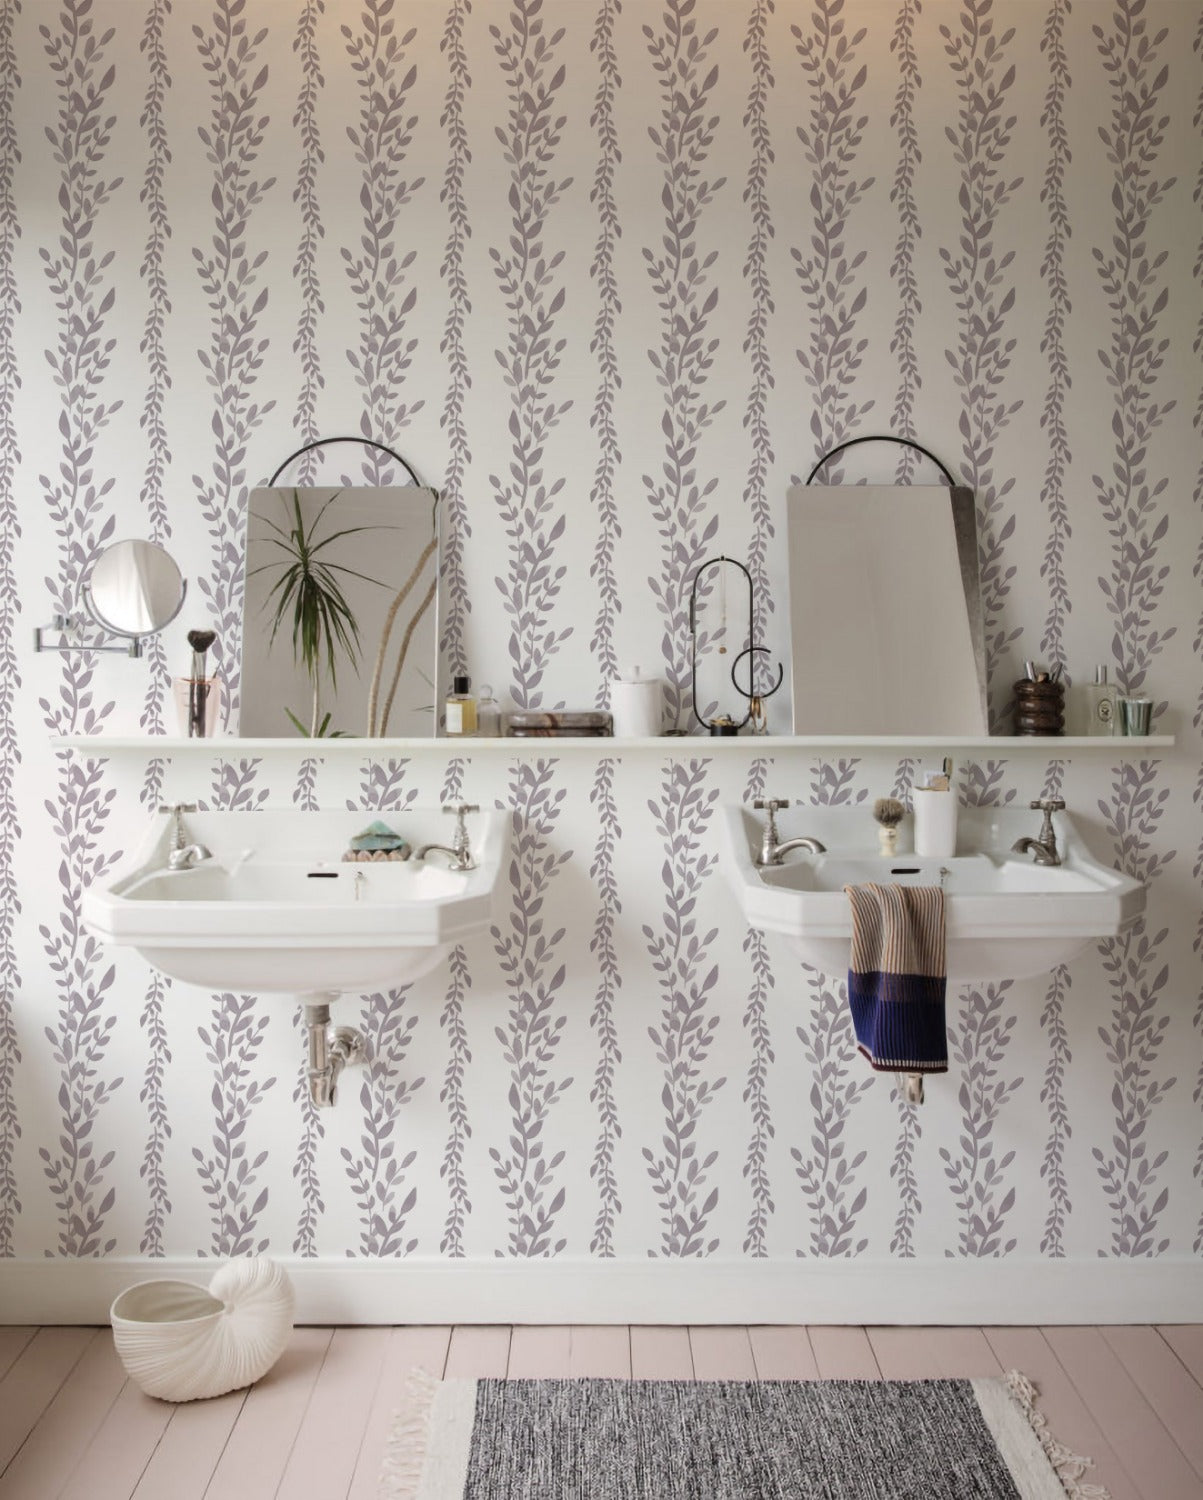 Classic Floral Wallpaper in a bathroom setup, providing a serene and graceful look with its vertical gray leaf designs on a pale background, complementing minimalist bathroom fixtures